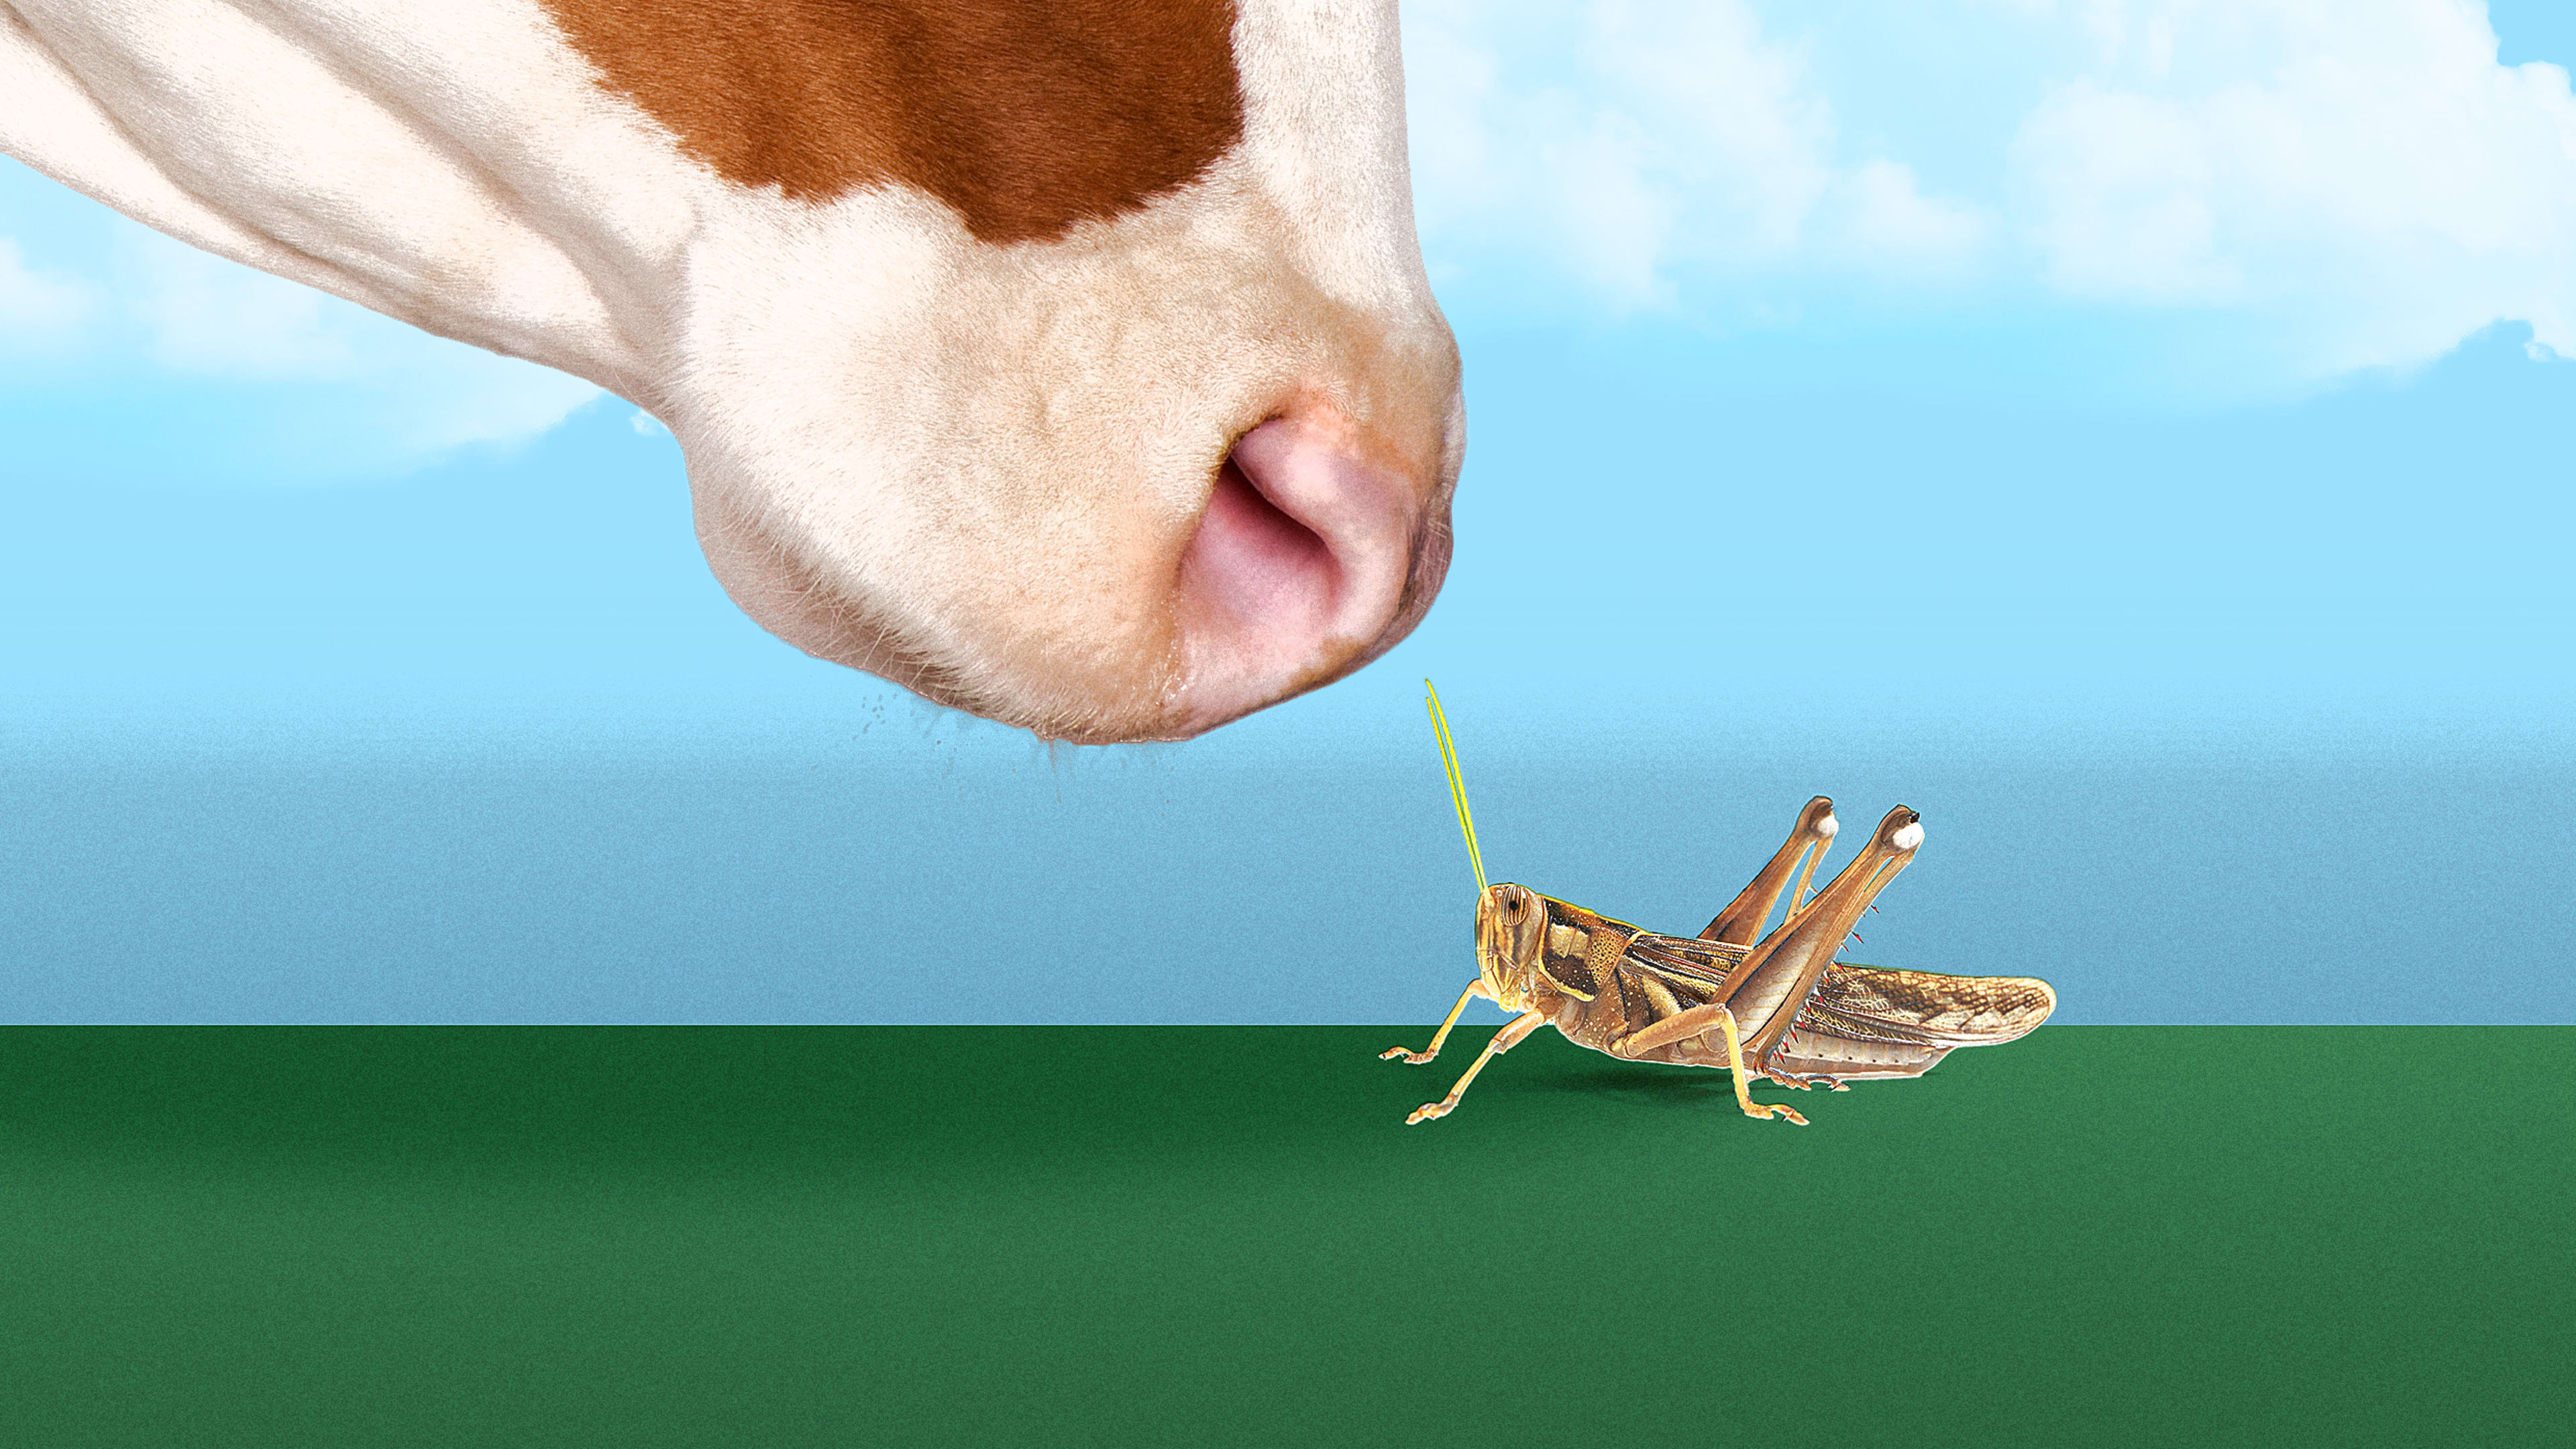 If people won’t eat bugs, maybe cows will?